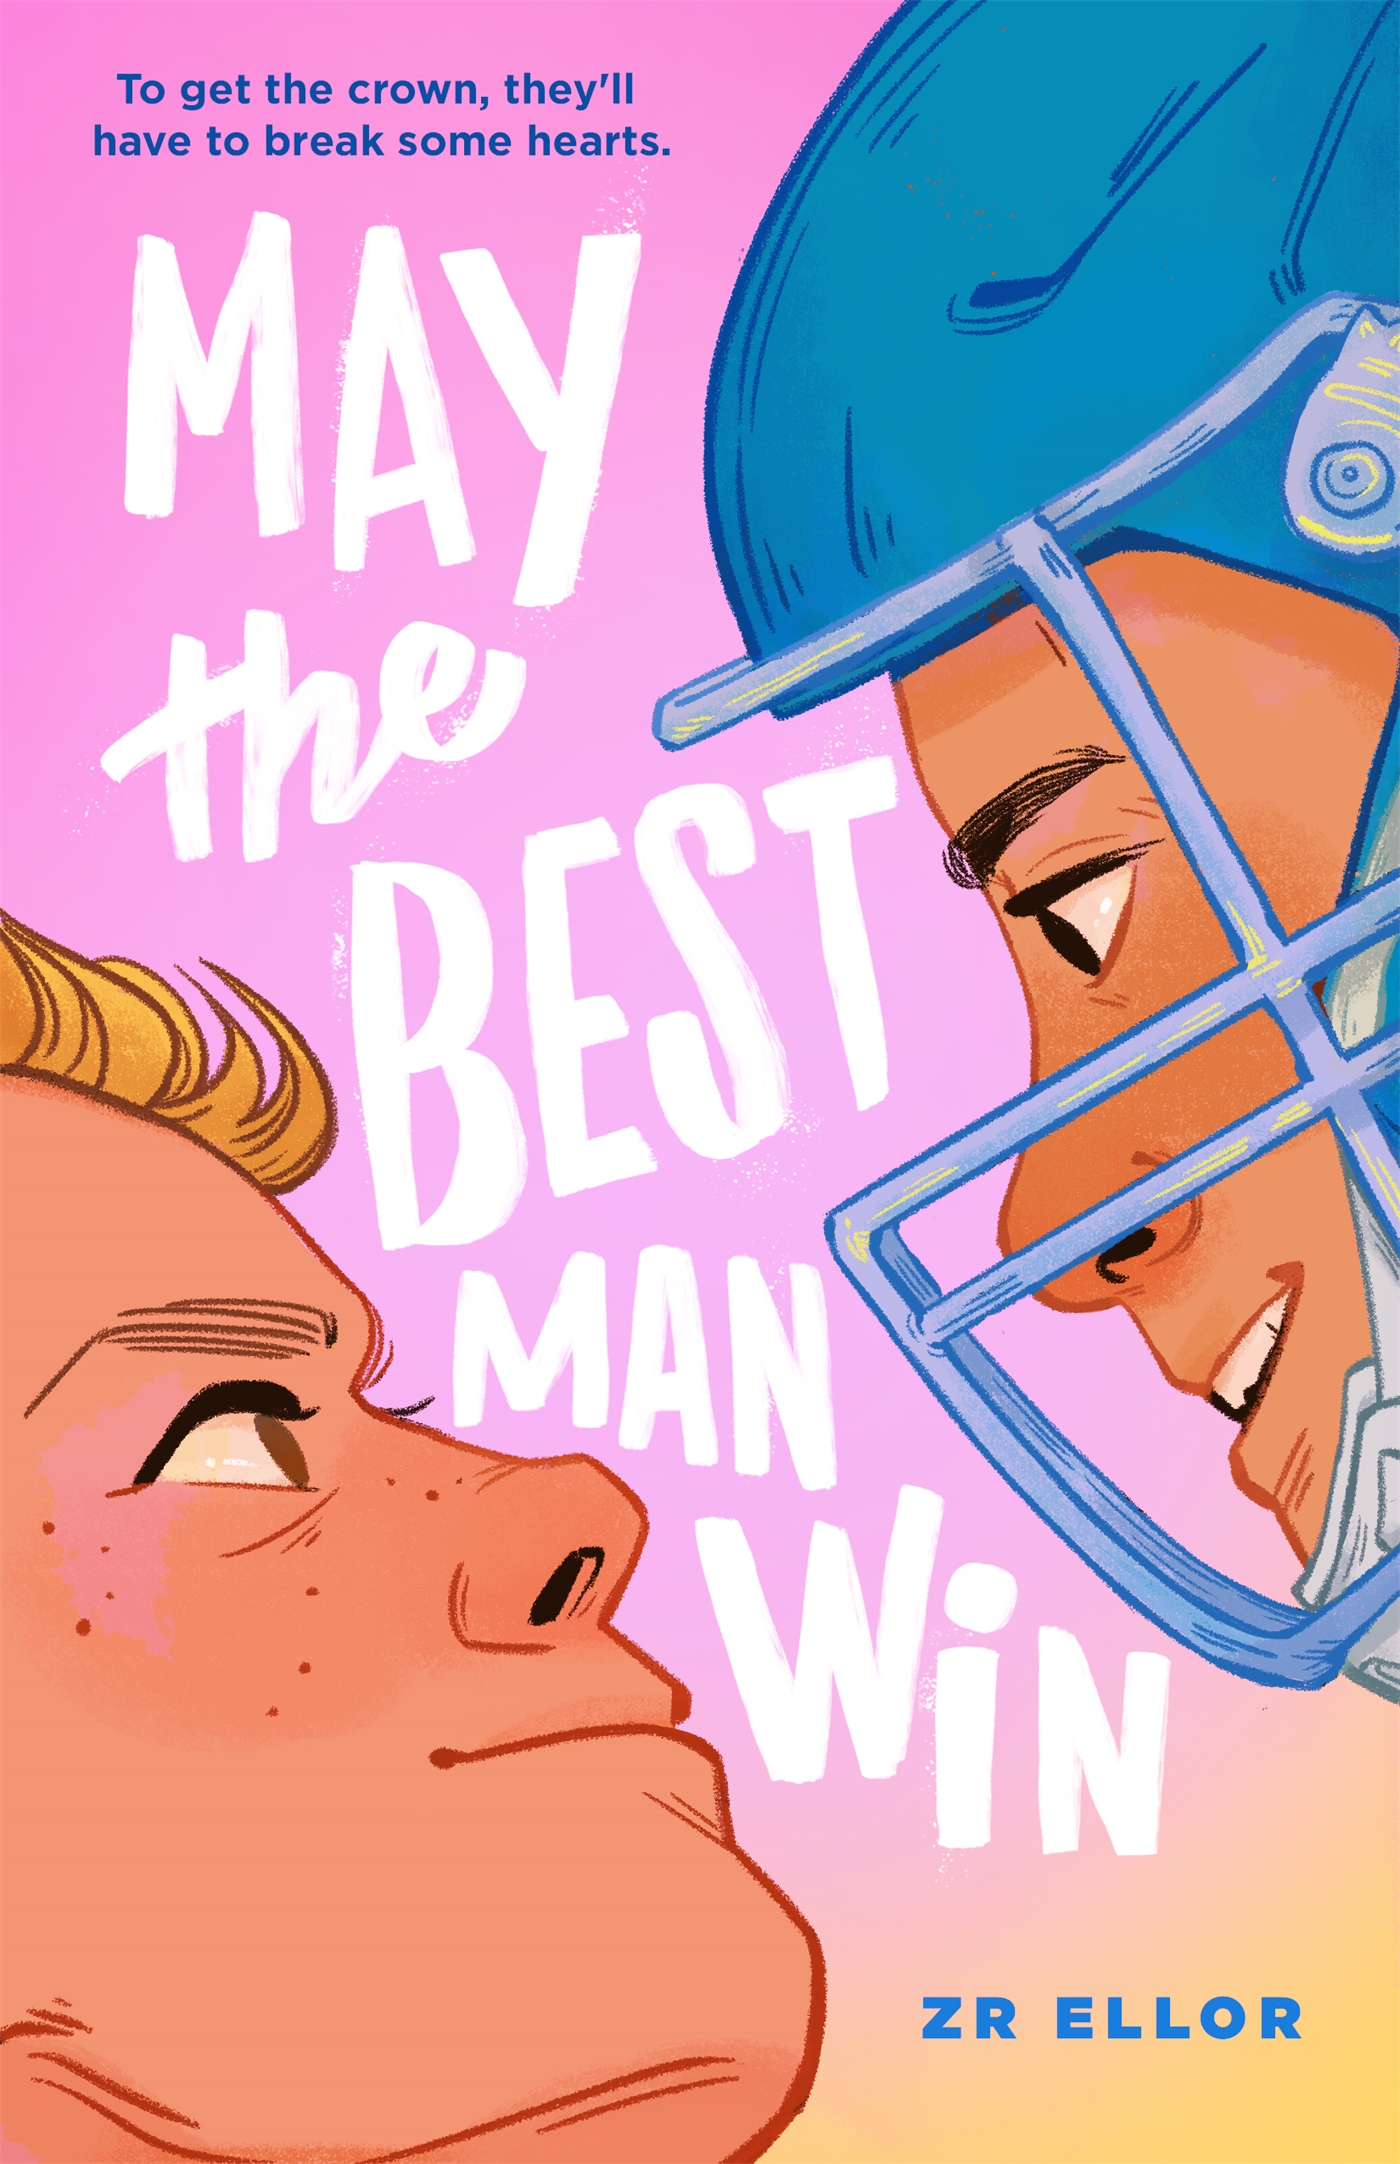 Book May the Best Man Win